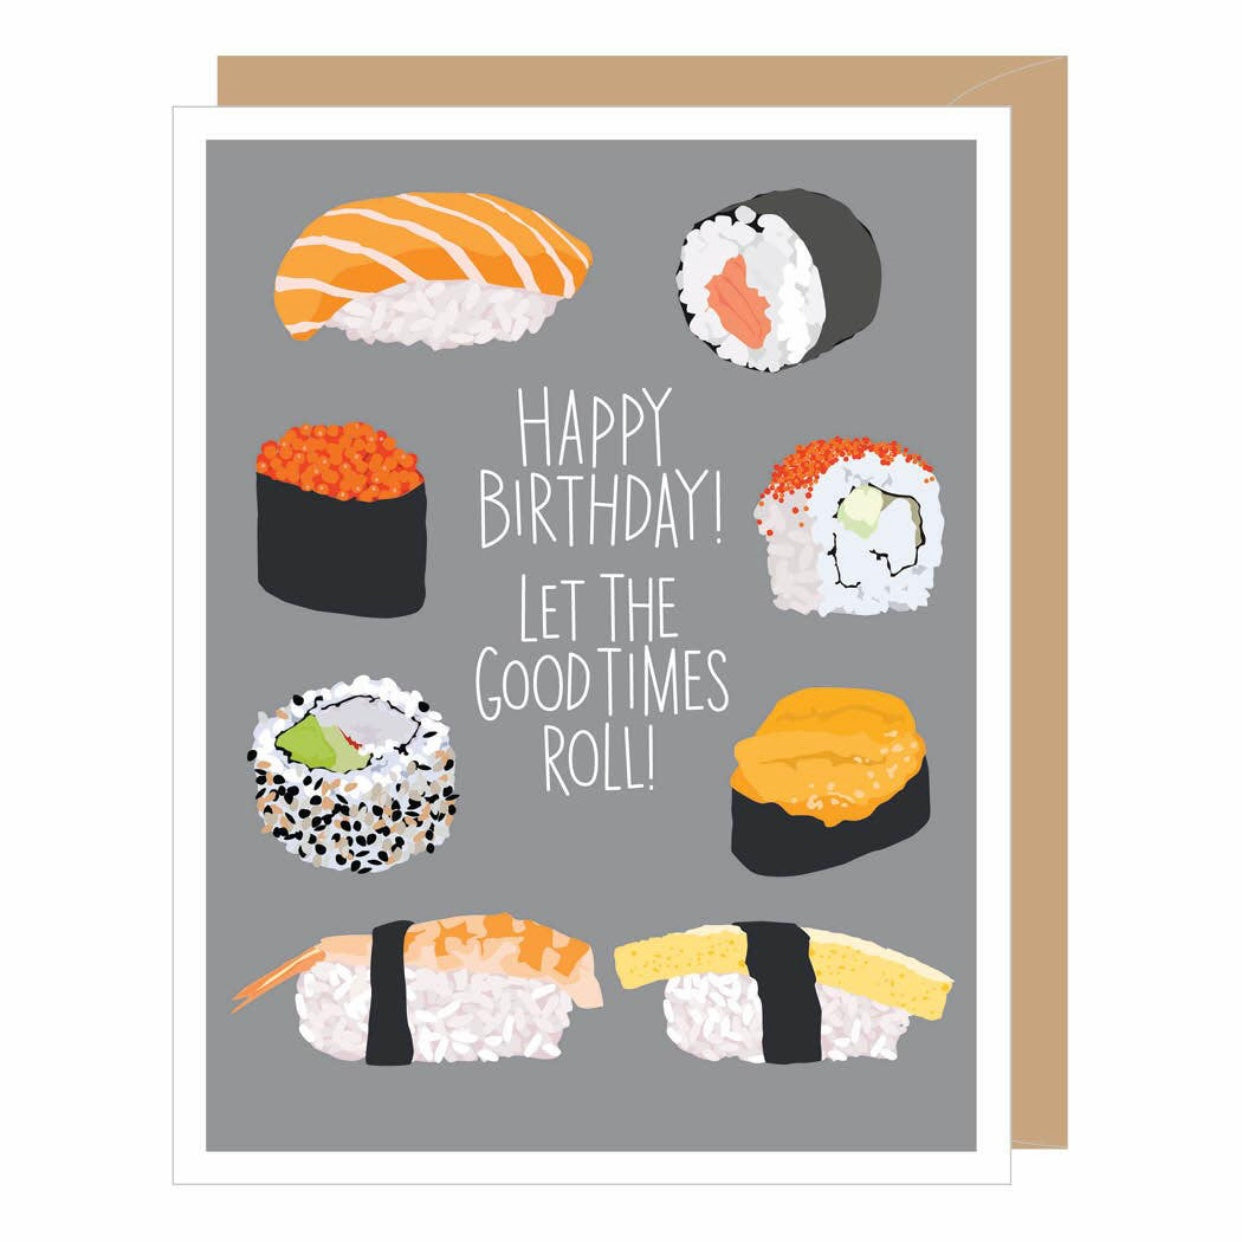 Happy Birthday Let the good times roll greeting card